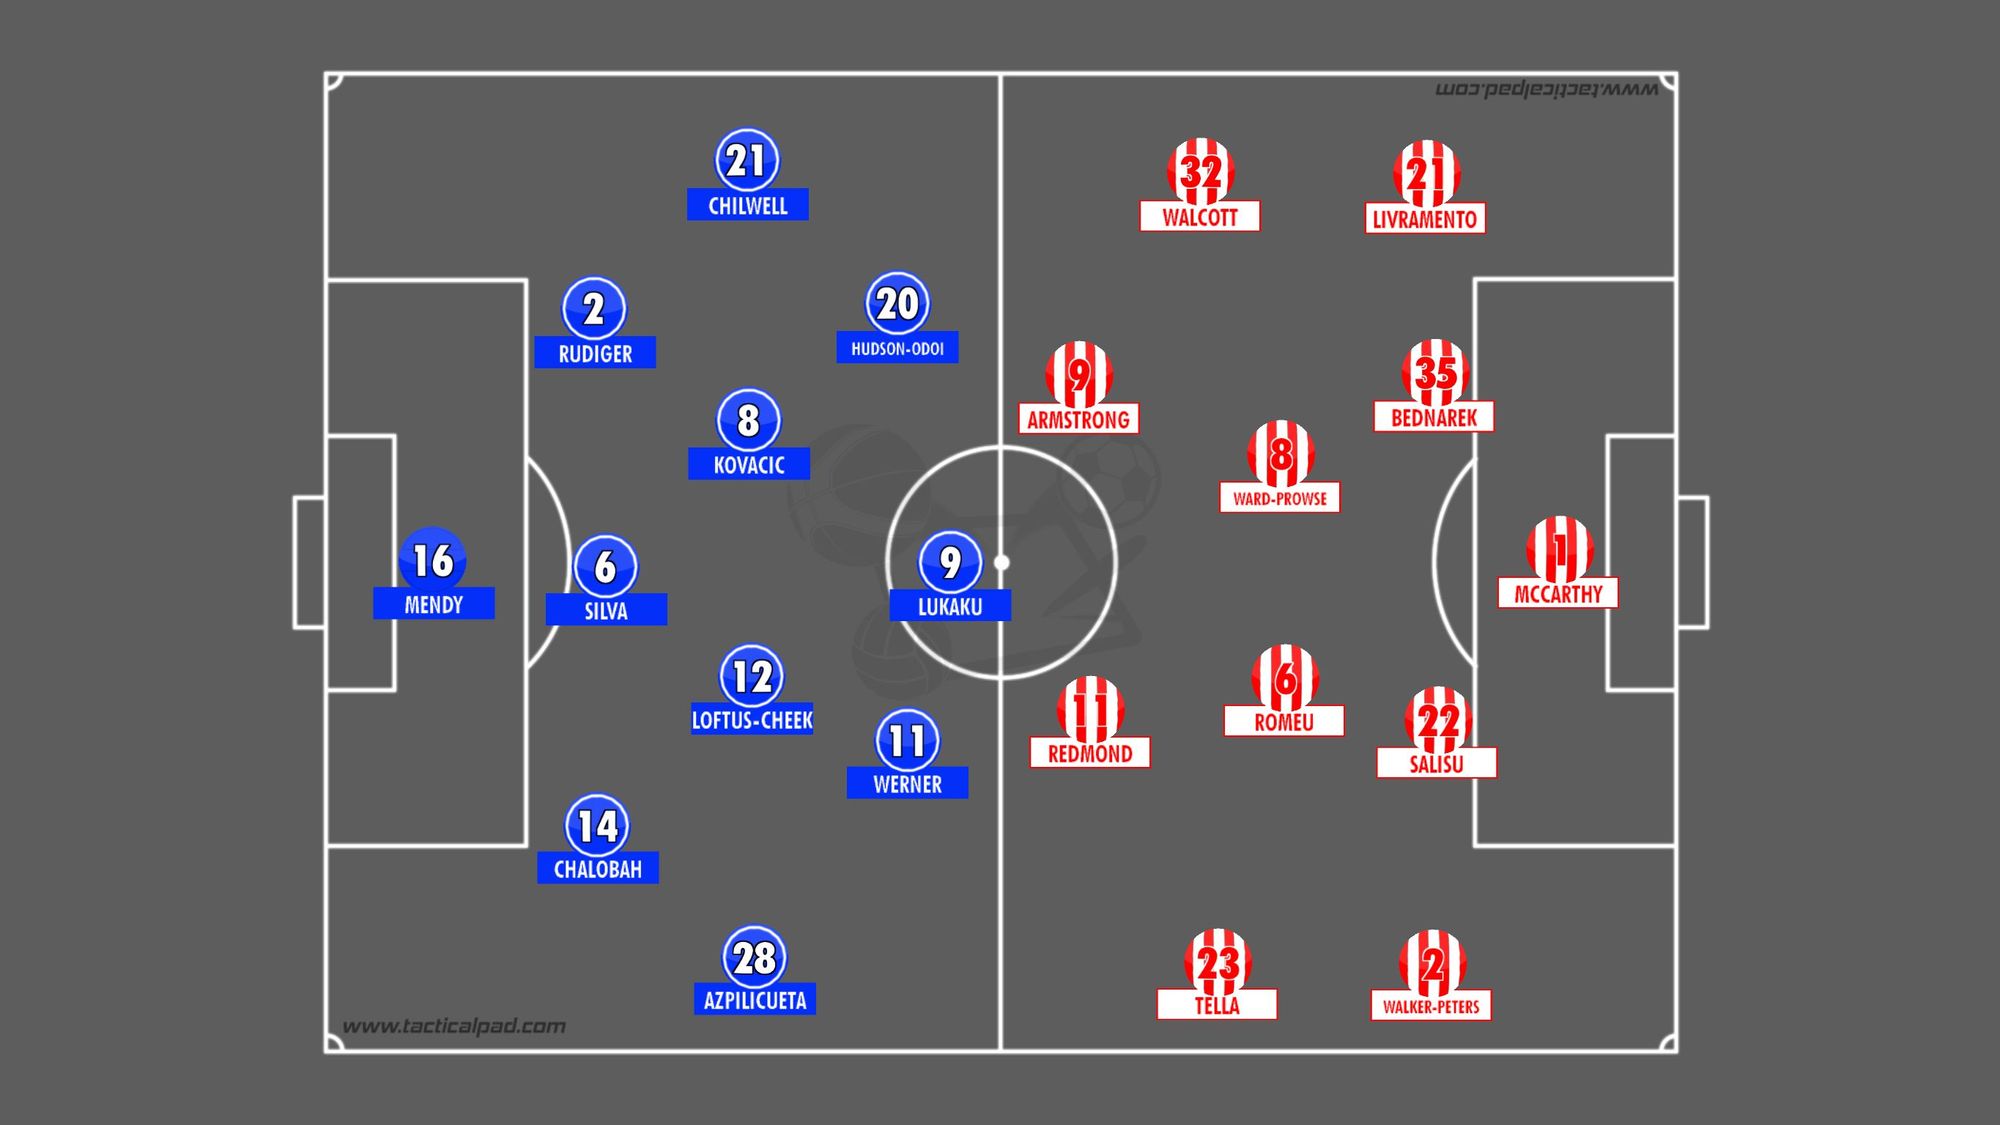 Chelsea see off Southampton in a late home win - Tactical Analysis